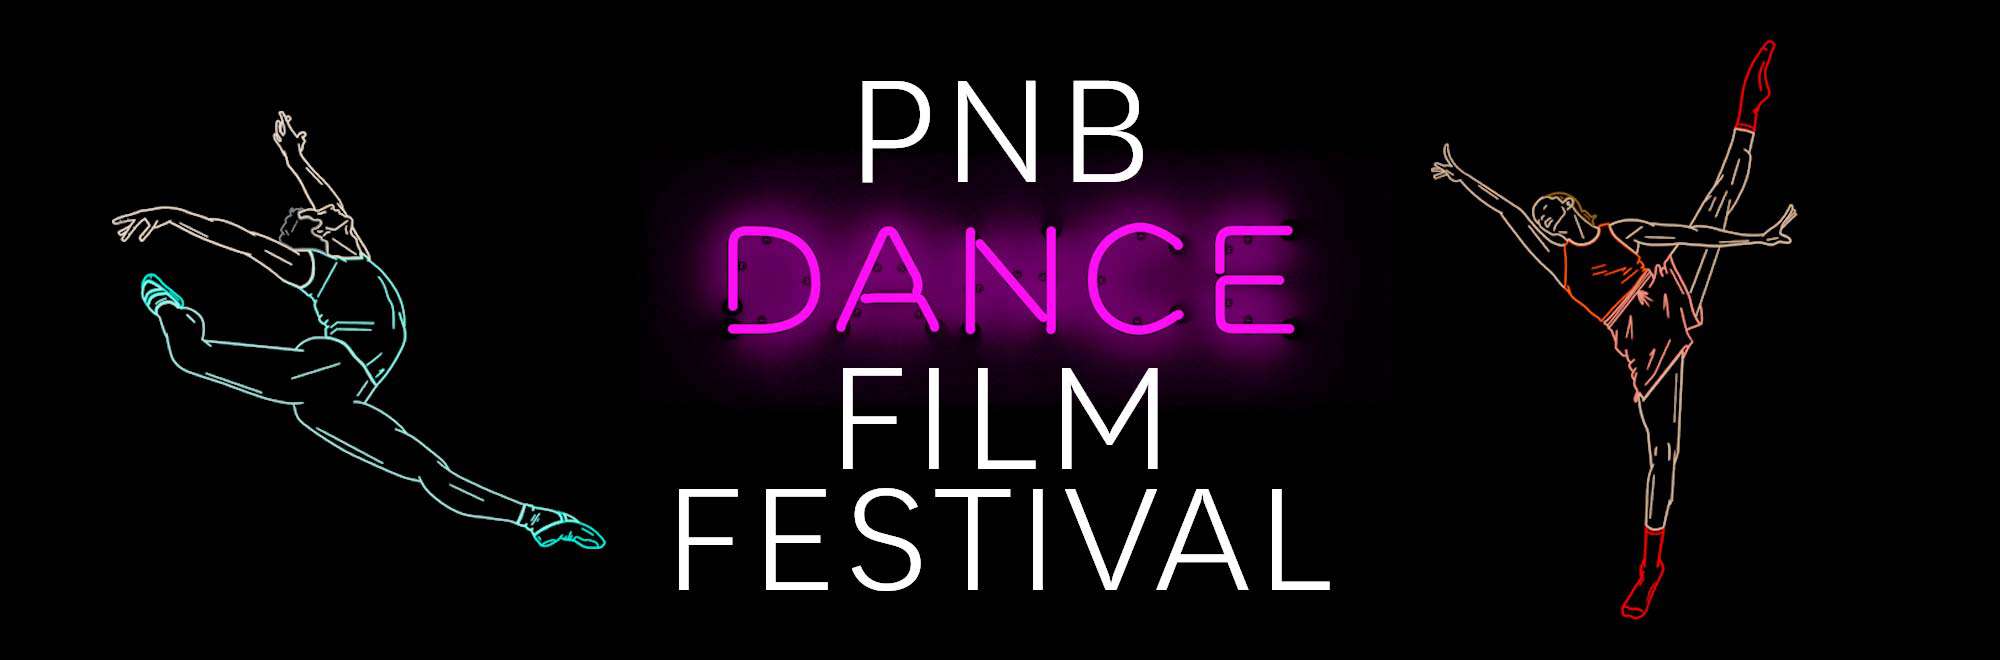 PNB Dance Film Festival: Now Accepting Submissions